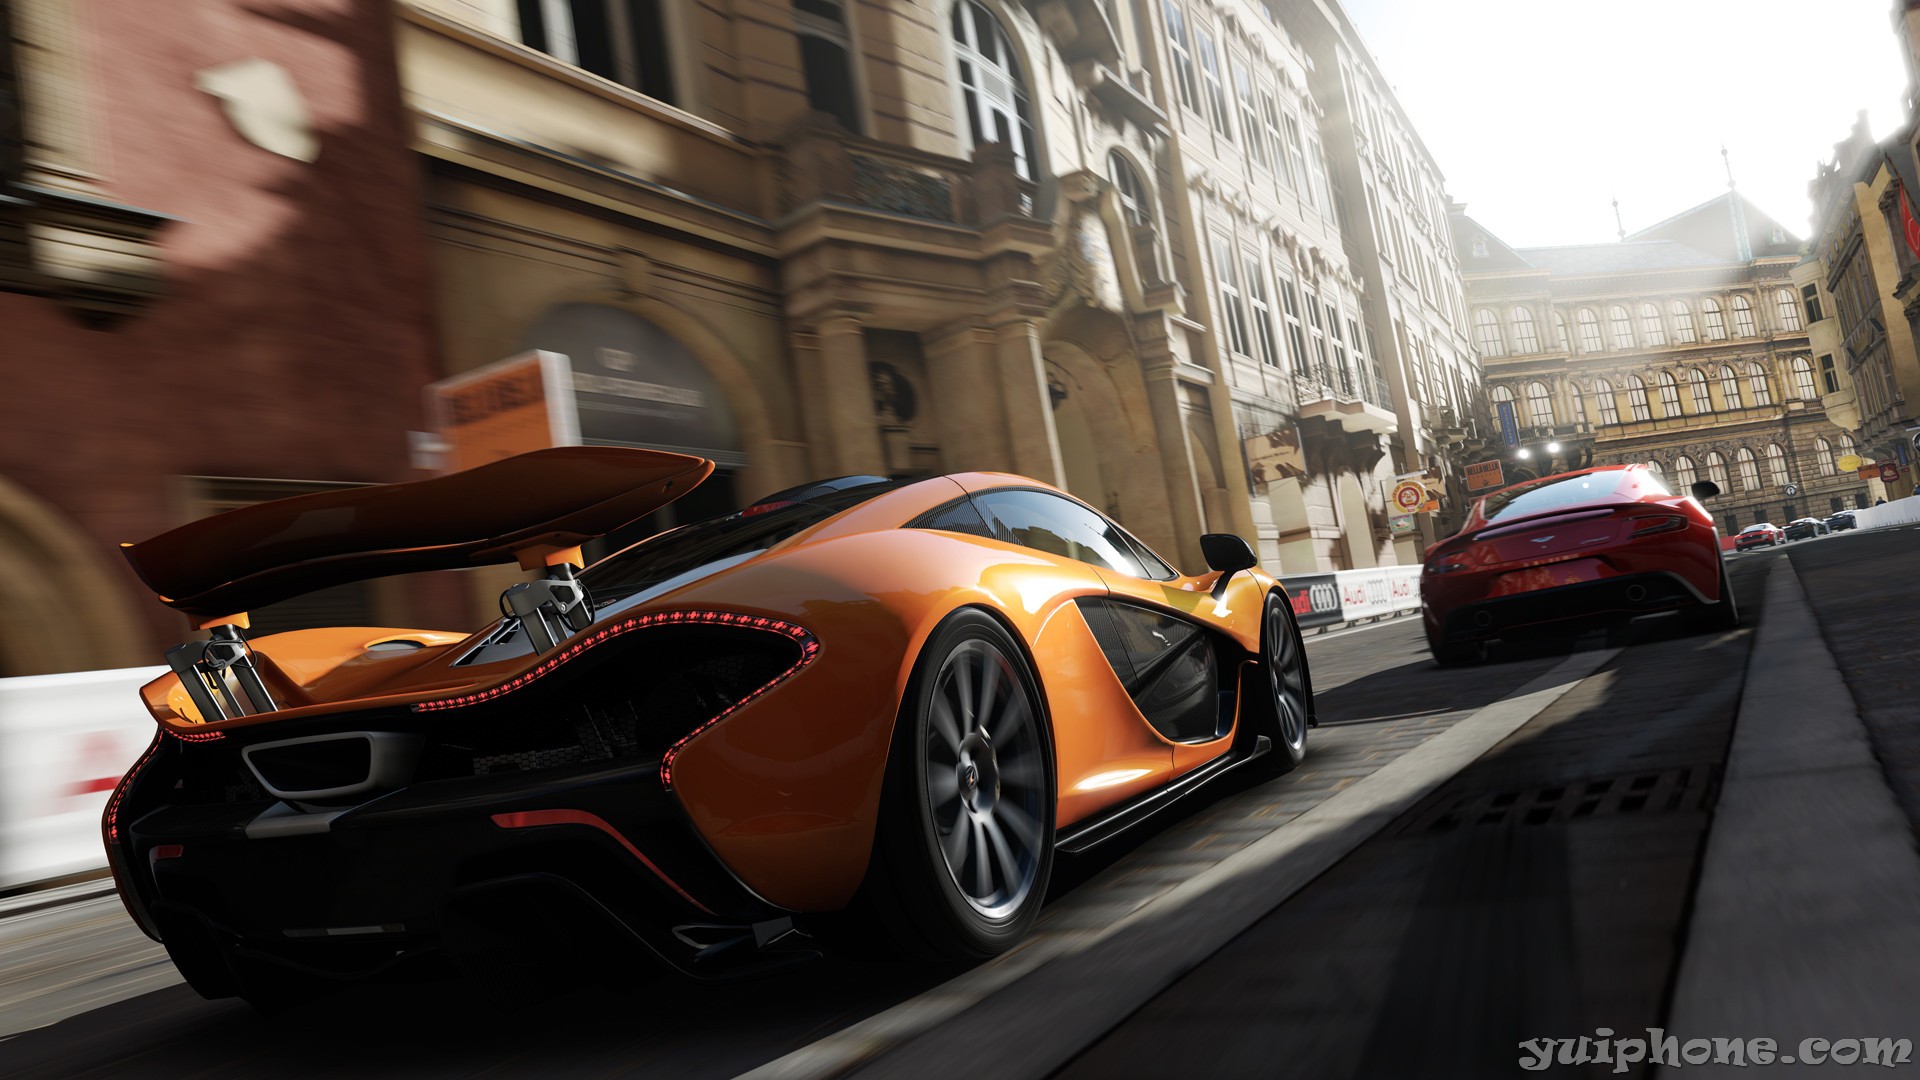 Forza Motorsport 5 Full HD Wallpaper and Background Image | 1920x1080 .